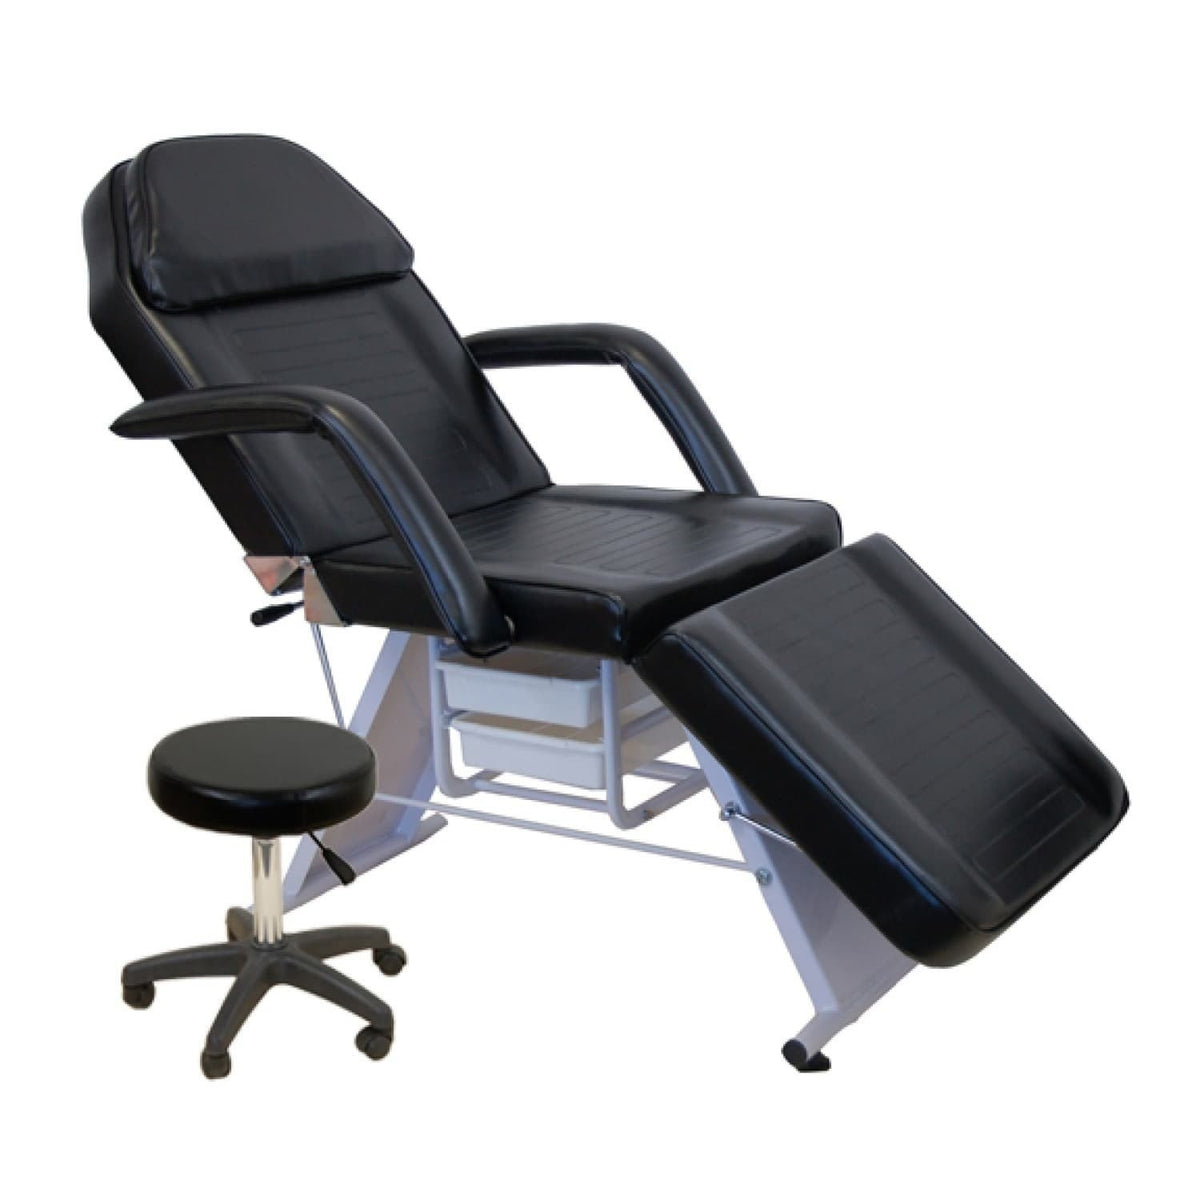 Dermalogic Dermalogic Parker Facial Bed &amp; Stool Facial Chairs - ChairsThatGive